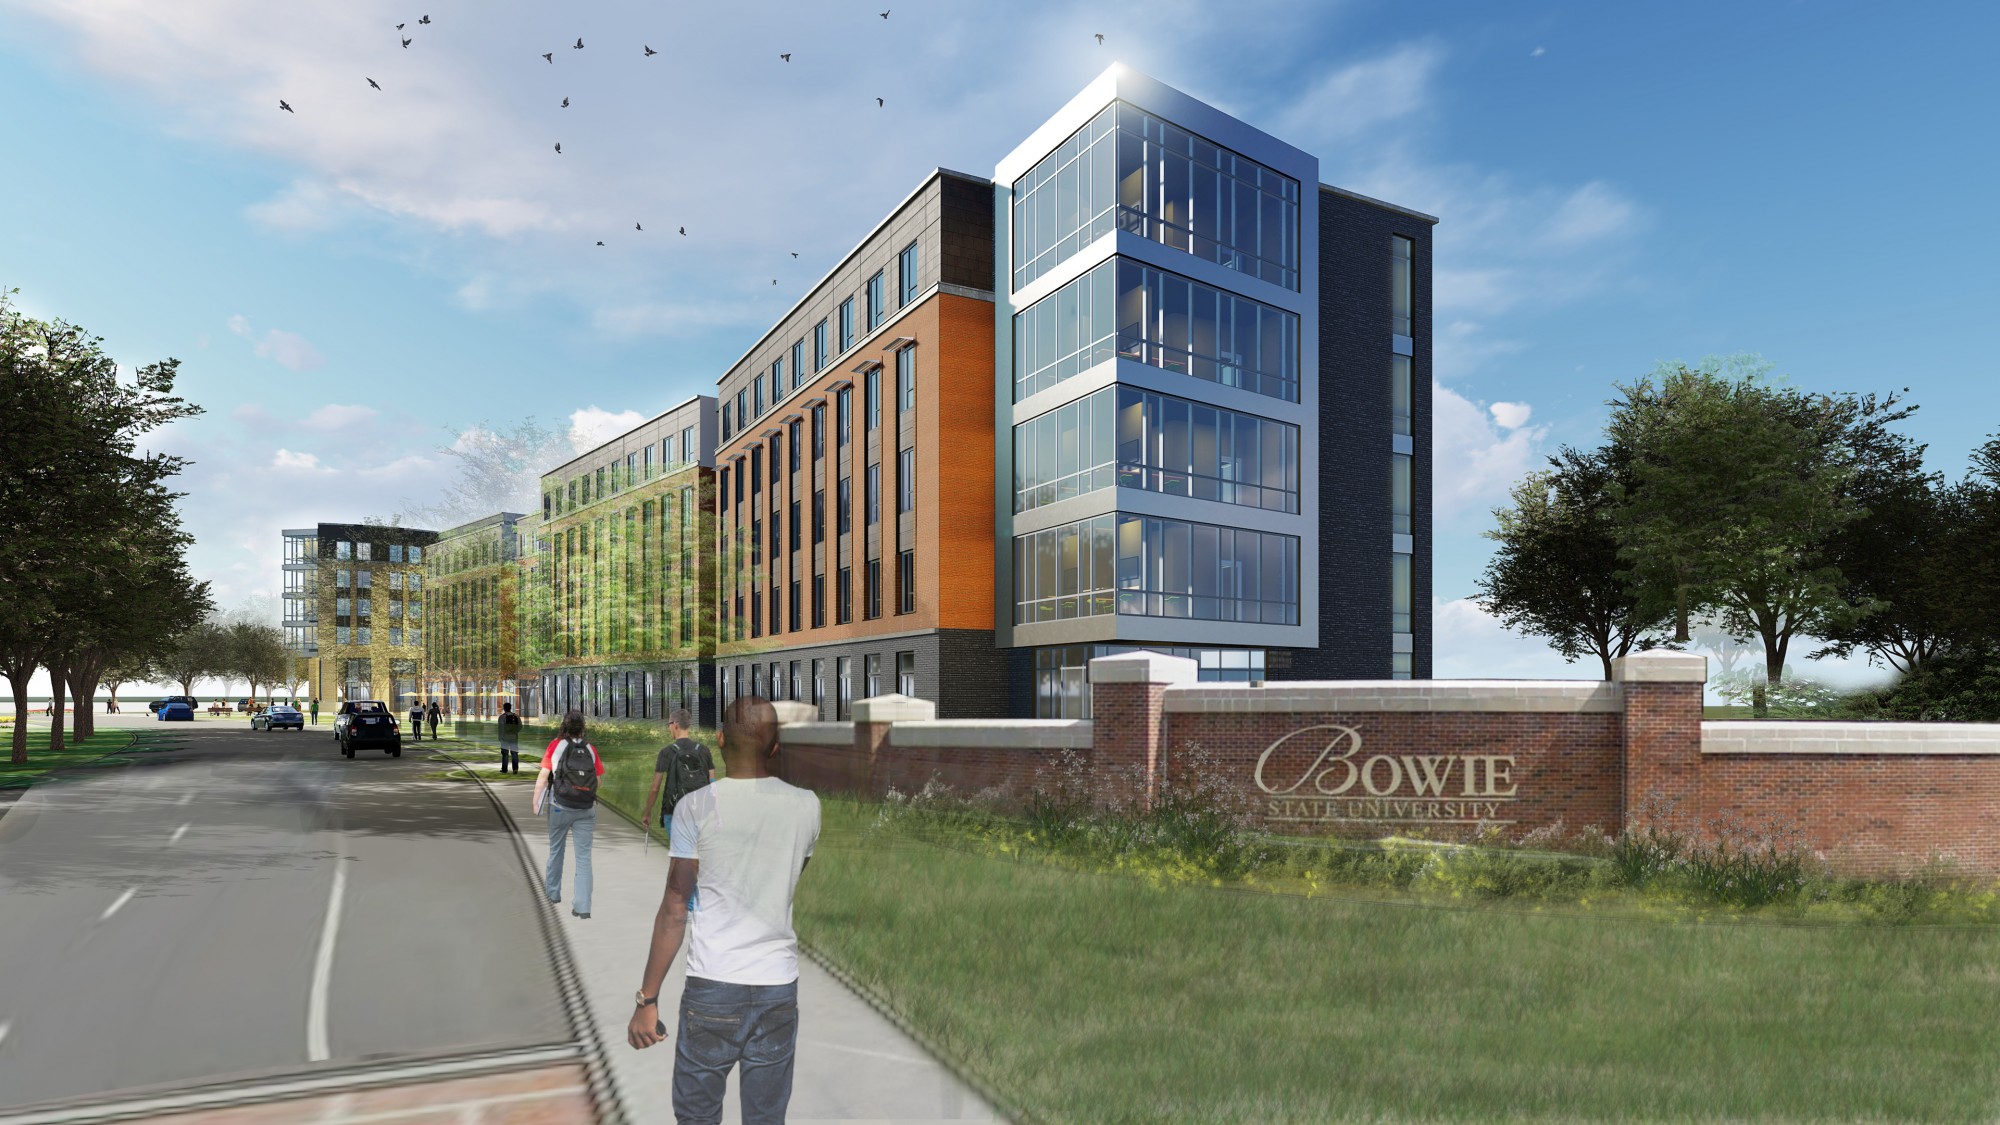 HENRY ADAMS provided the mechanical engineering design for the new building at Bowie State University.